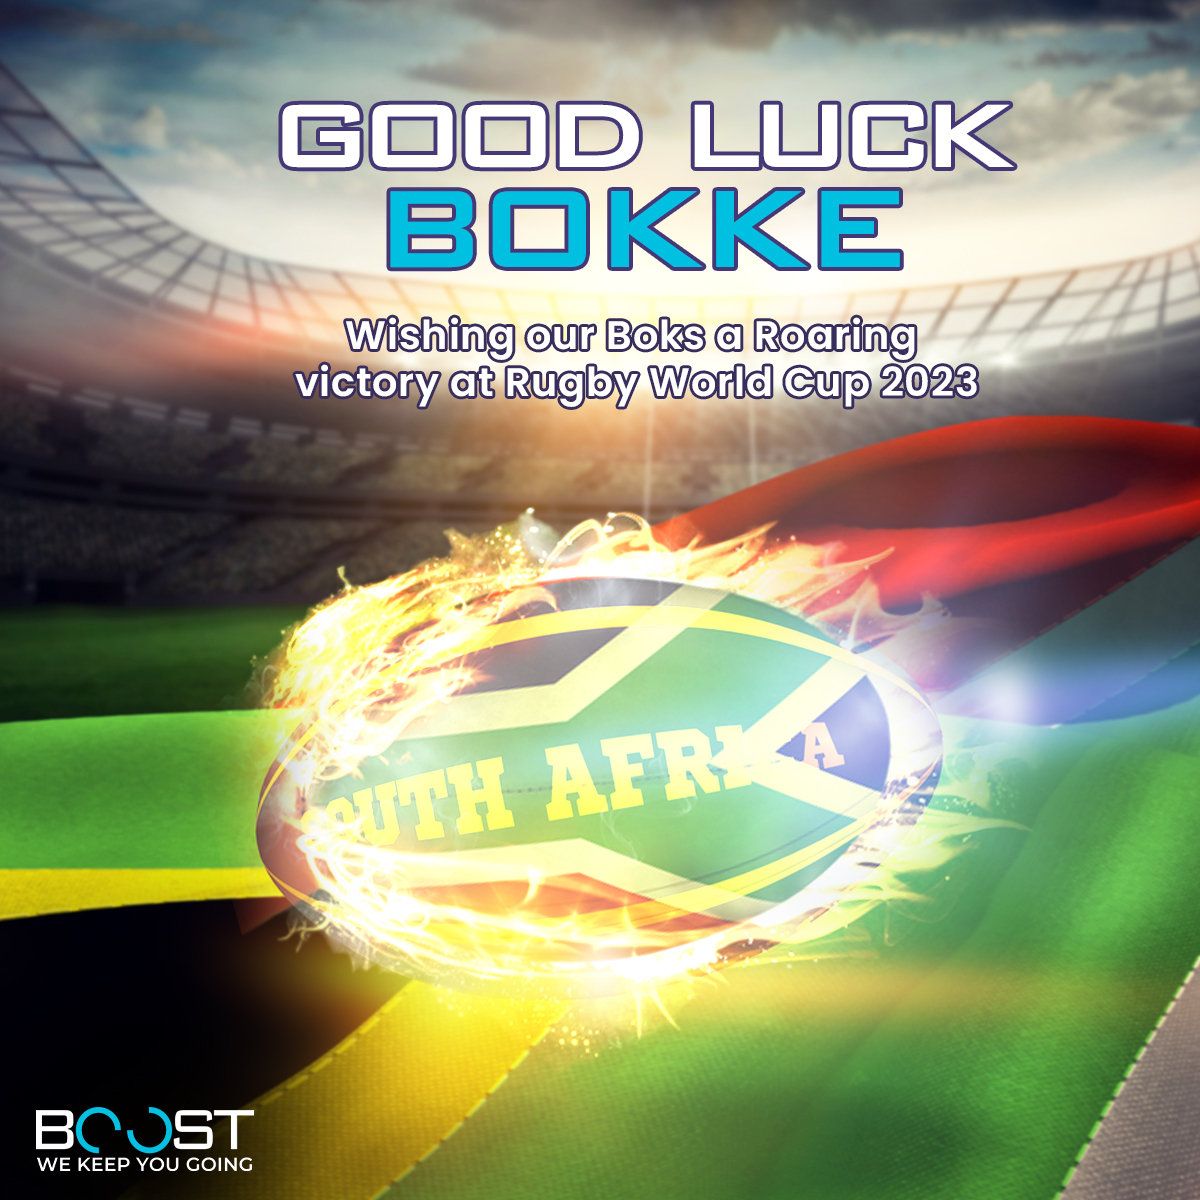 🏉Wishing the South African Rugby Team the Best of Luck for the Rugby World Cup 2023!

To our fearless warriors on the field,

#RugbyWorldCup2023 #GoBokke #SouthAfricanRugby #StrongerTogether #BelieveInGreenAndGold #RoaringSupport #LegendsoftheGame #PassionAndPride #RugbyLegends